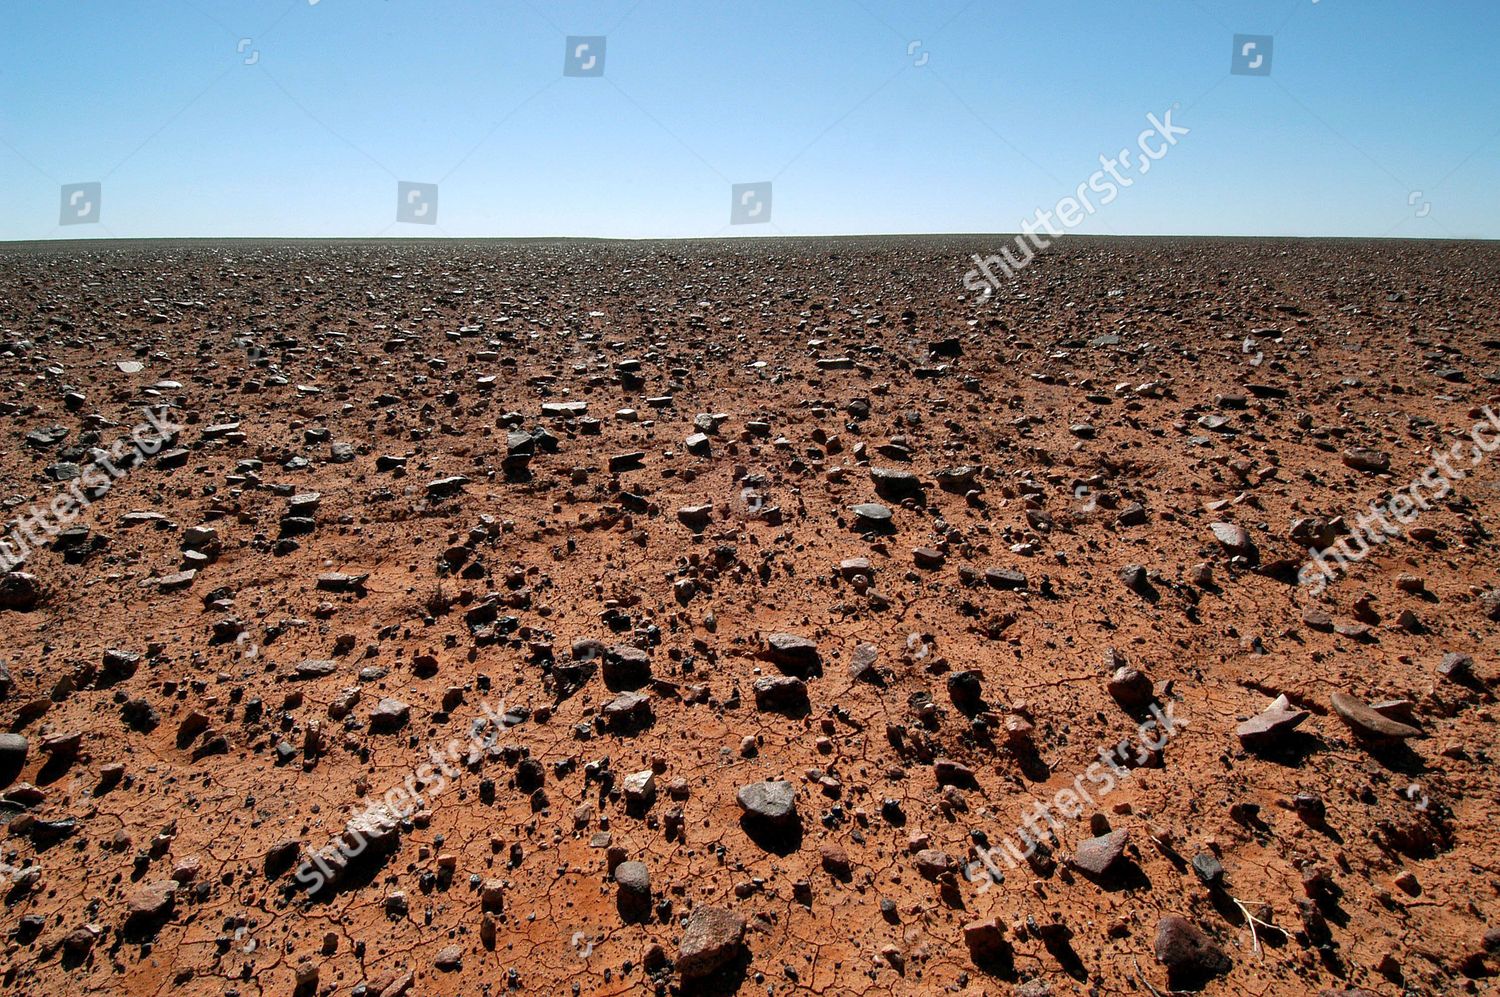 incredible similarity between recent photos outback Stock - Image | Shutterstock